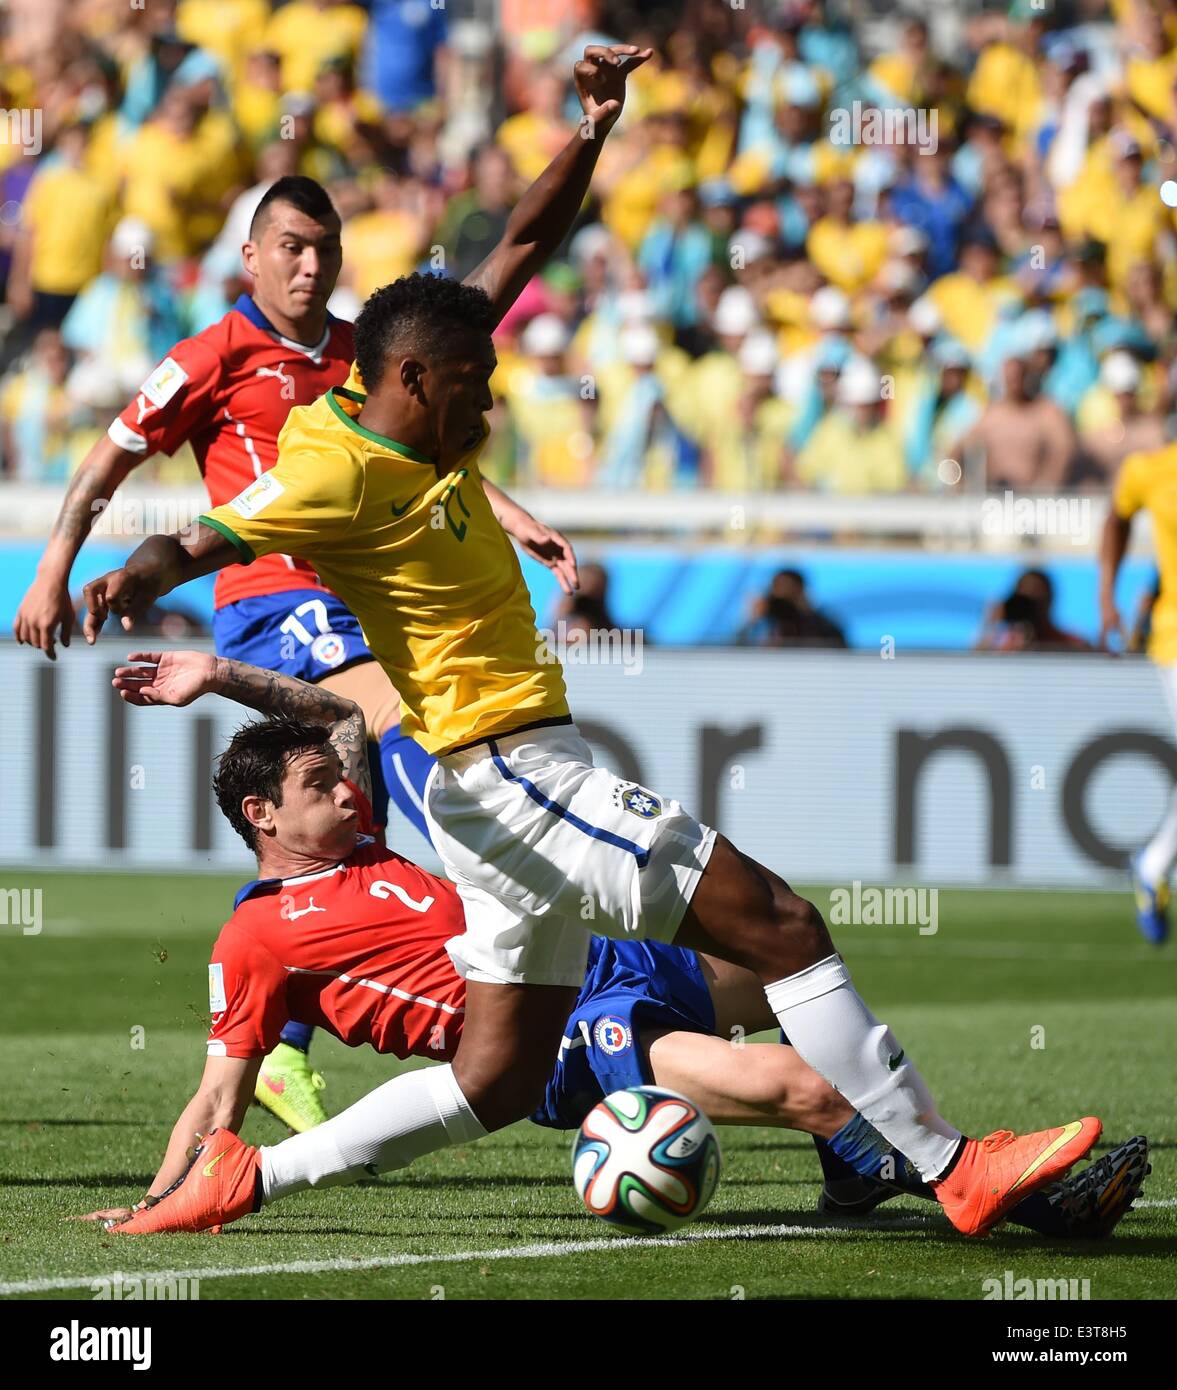 Belo Horizonte, Brazil. 28th June, 2014. Brazil's Jo vies with Chile's Eugenio Mena during a Round of 16 match between Brazil and Chile of 2014 FIFA World Cup at the Estadio Mineirao Stadium in Belo Horizonte, Brazil, on June 28, 2014. Credit:  Liu Dawei/Xinhua/Alamy Live News Stock Photo